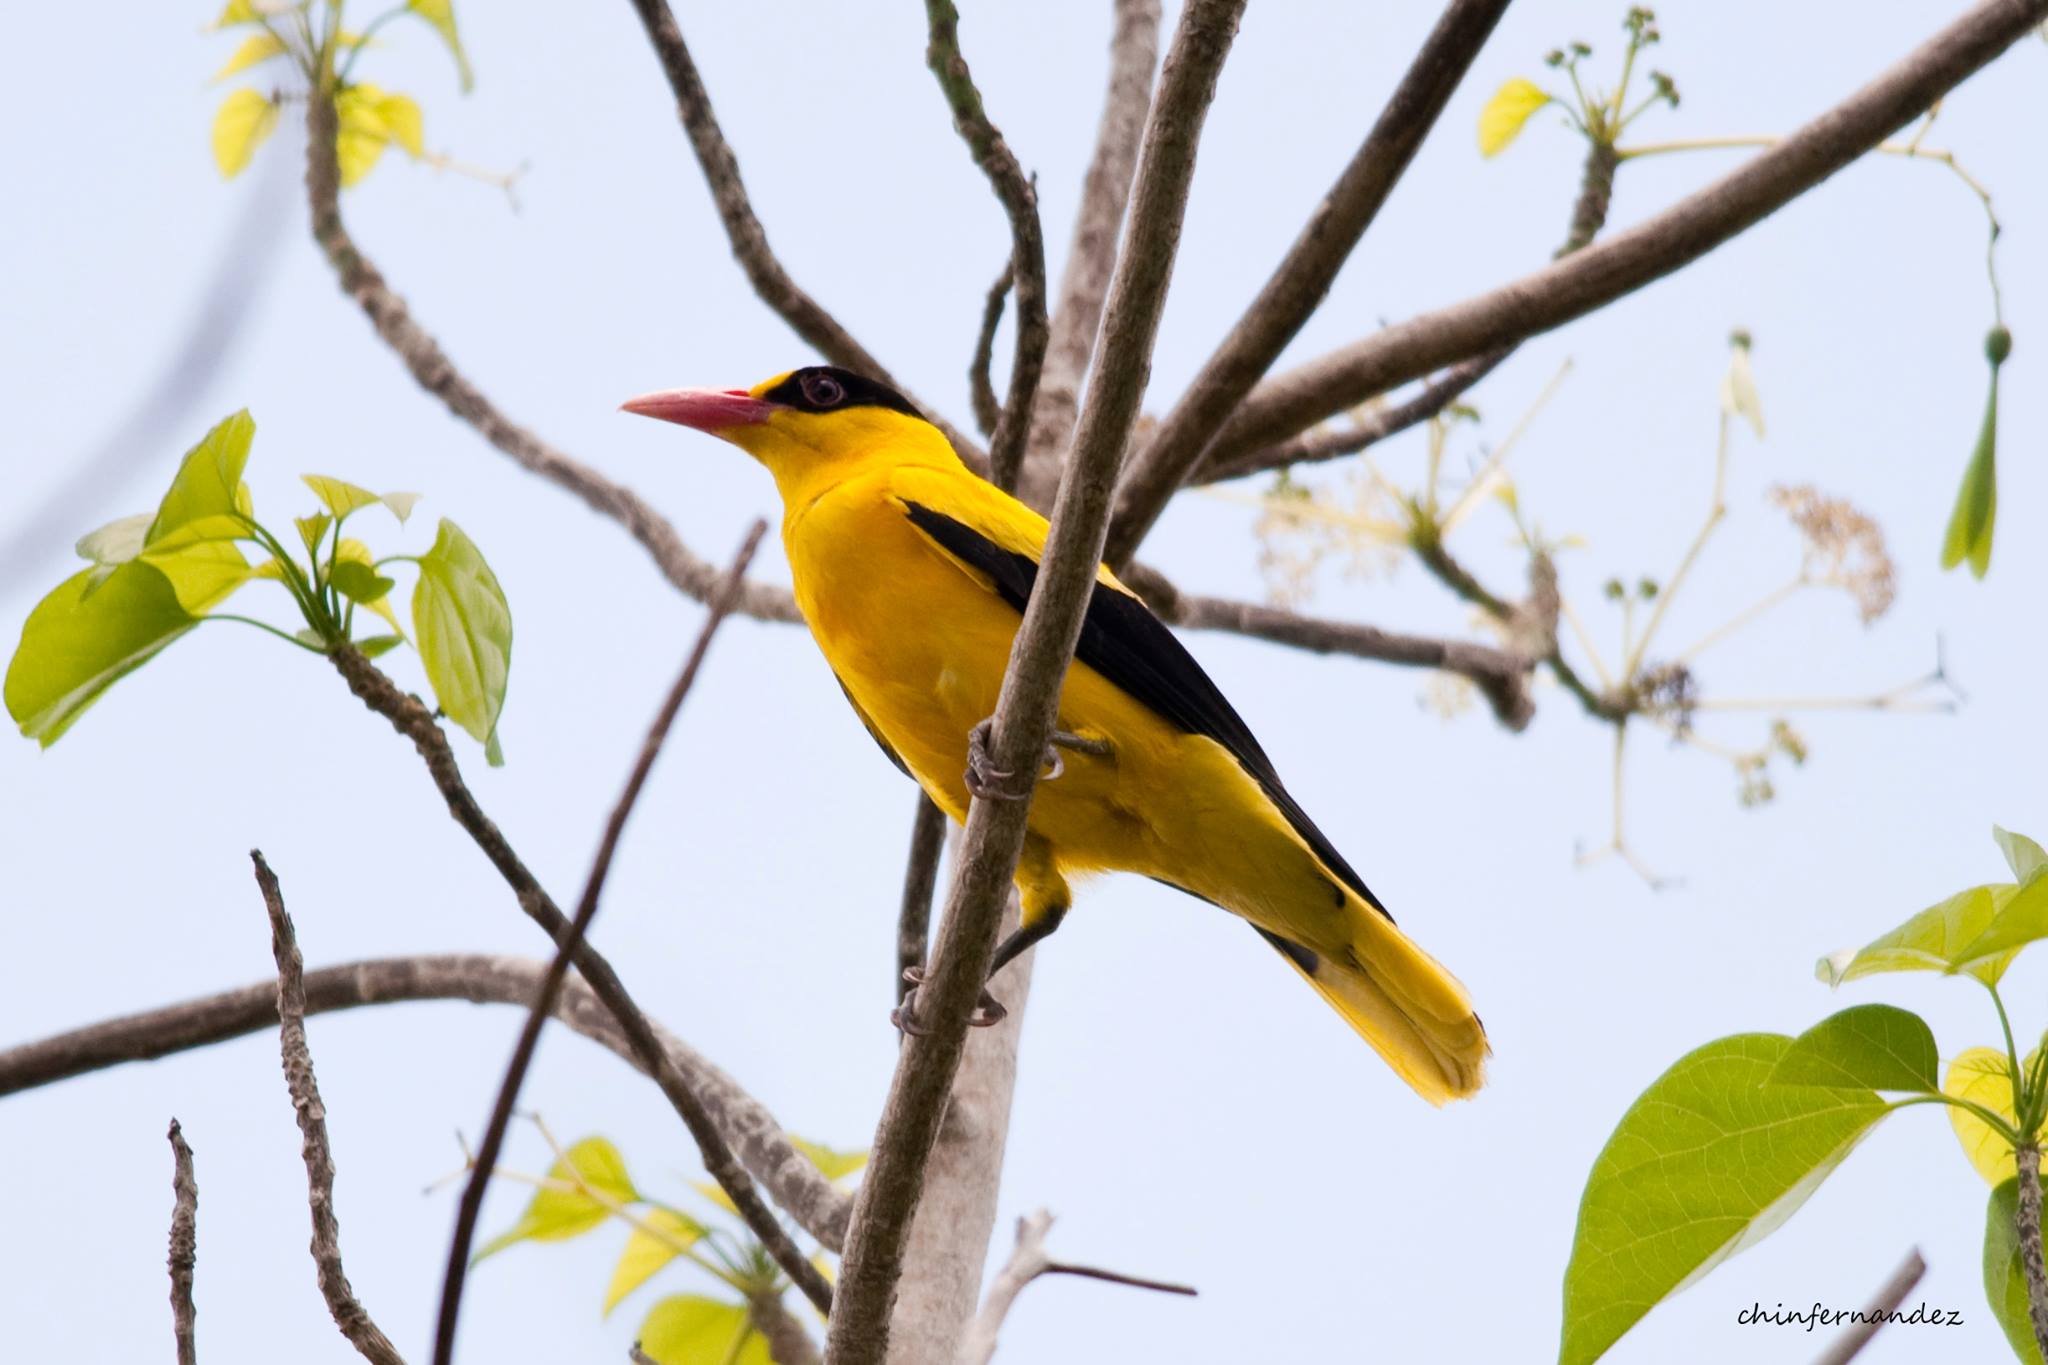 The brightly-colored Black-naped Oriole can be quite difficult to find even if it is bright yellow. Photo by Chin Fernandez.